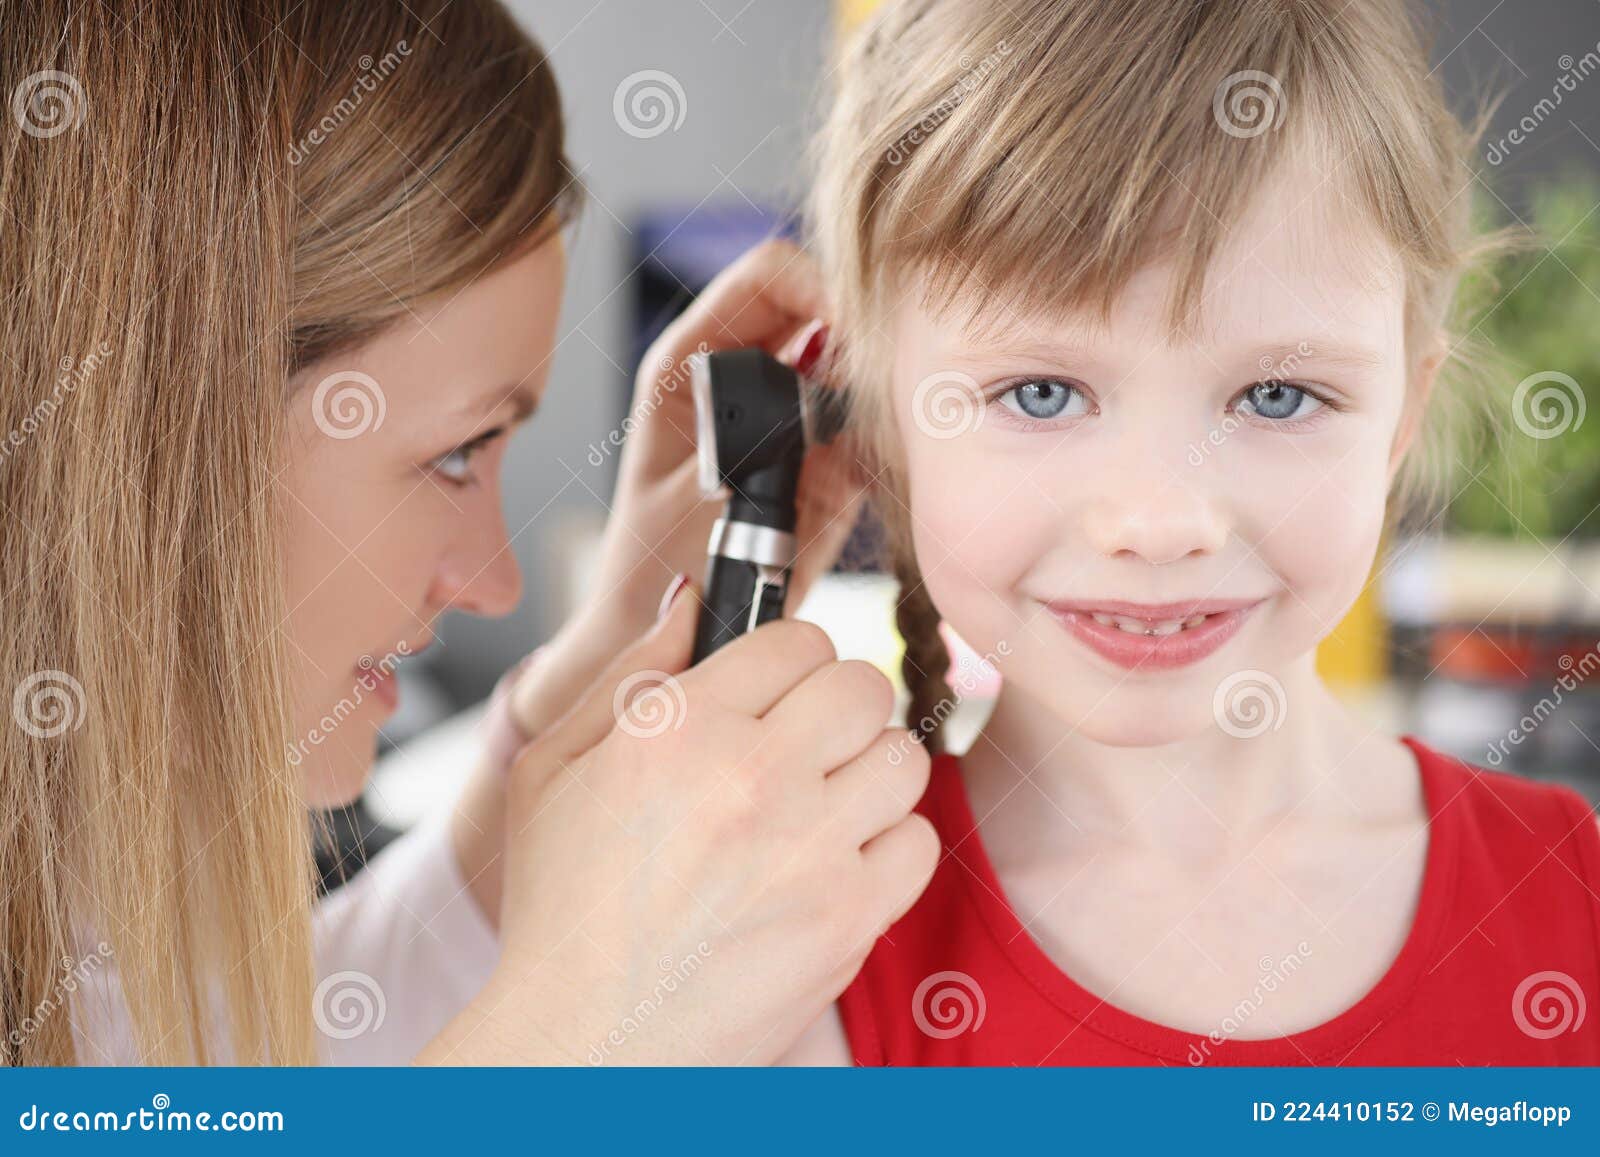 woman pediatrician looking at eardrum of little girl using otoscope in clinic